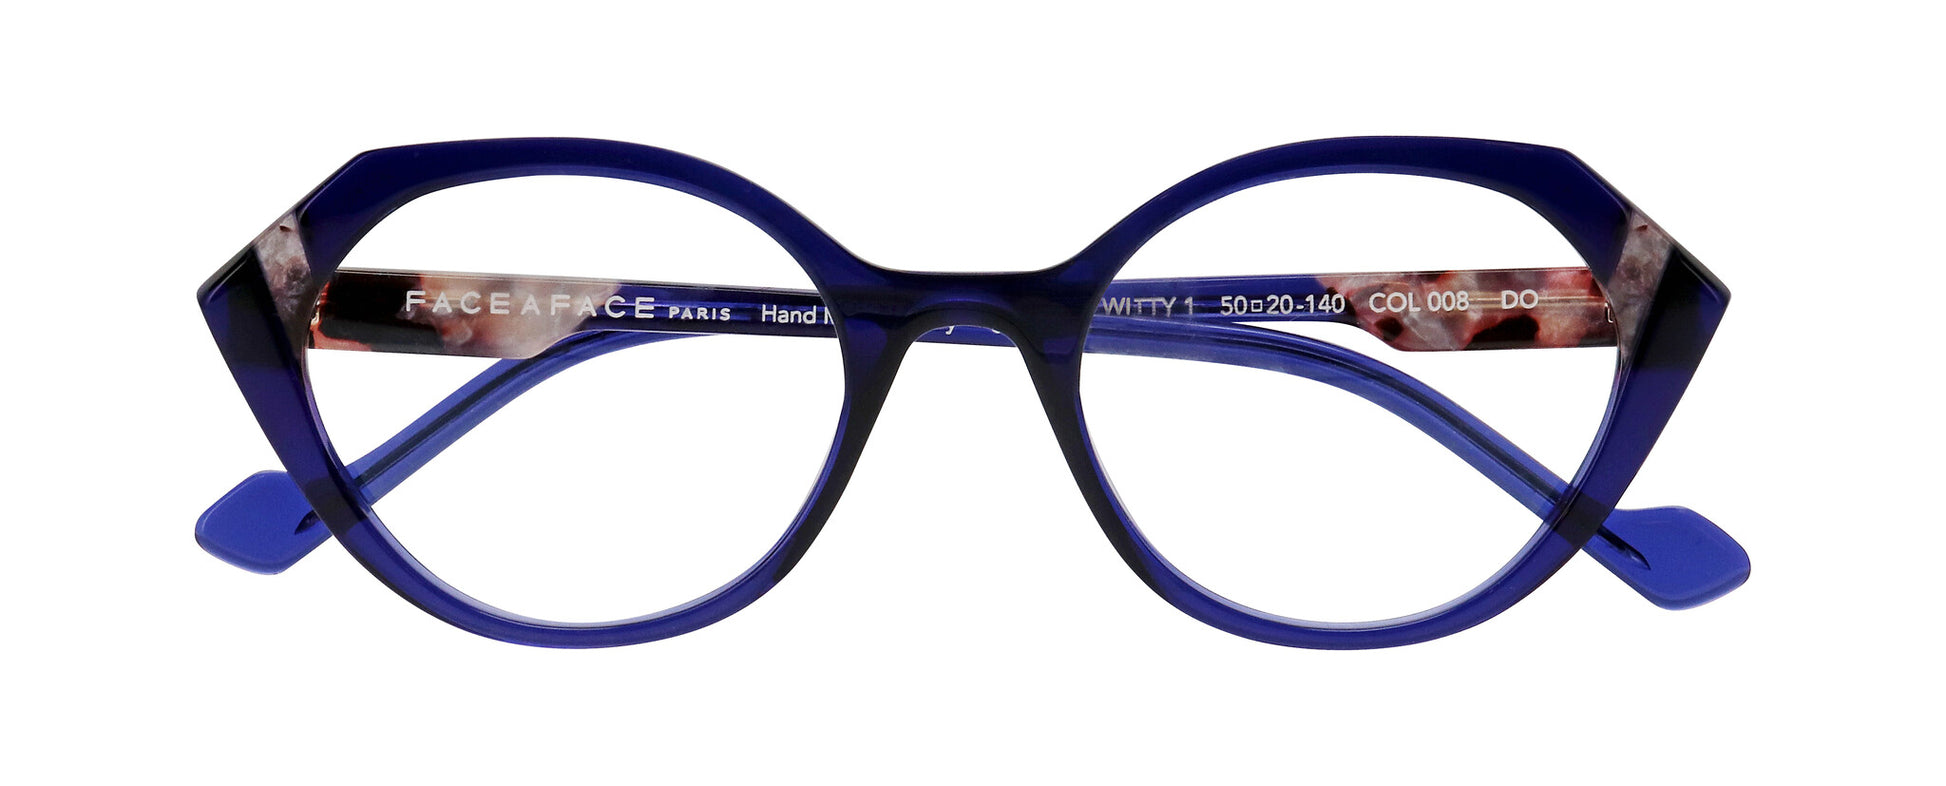 Women's prescription eyewear – A front view of an acetate frame that is hexagonal in shape and ink blue in colour with tortoiseshell accents.  